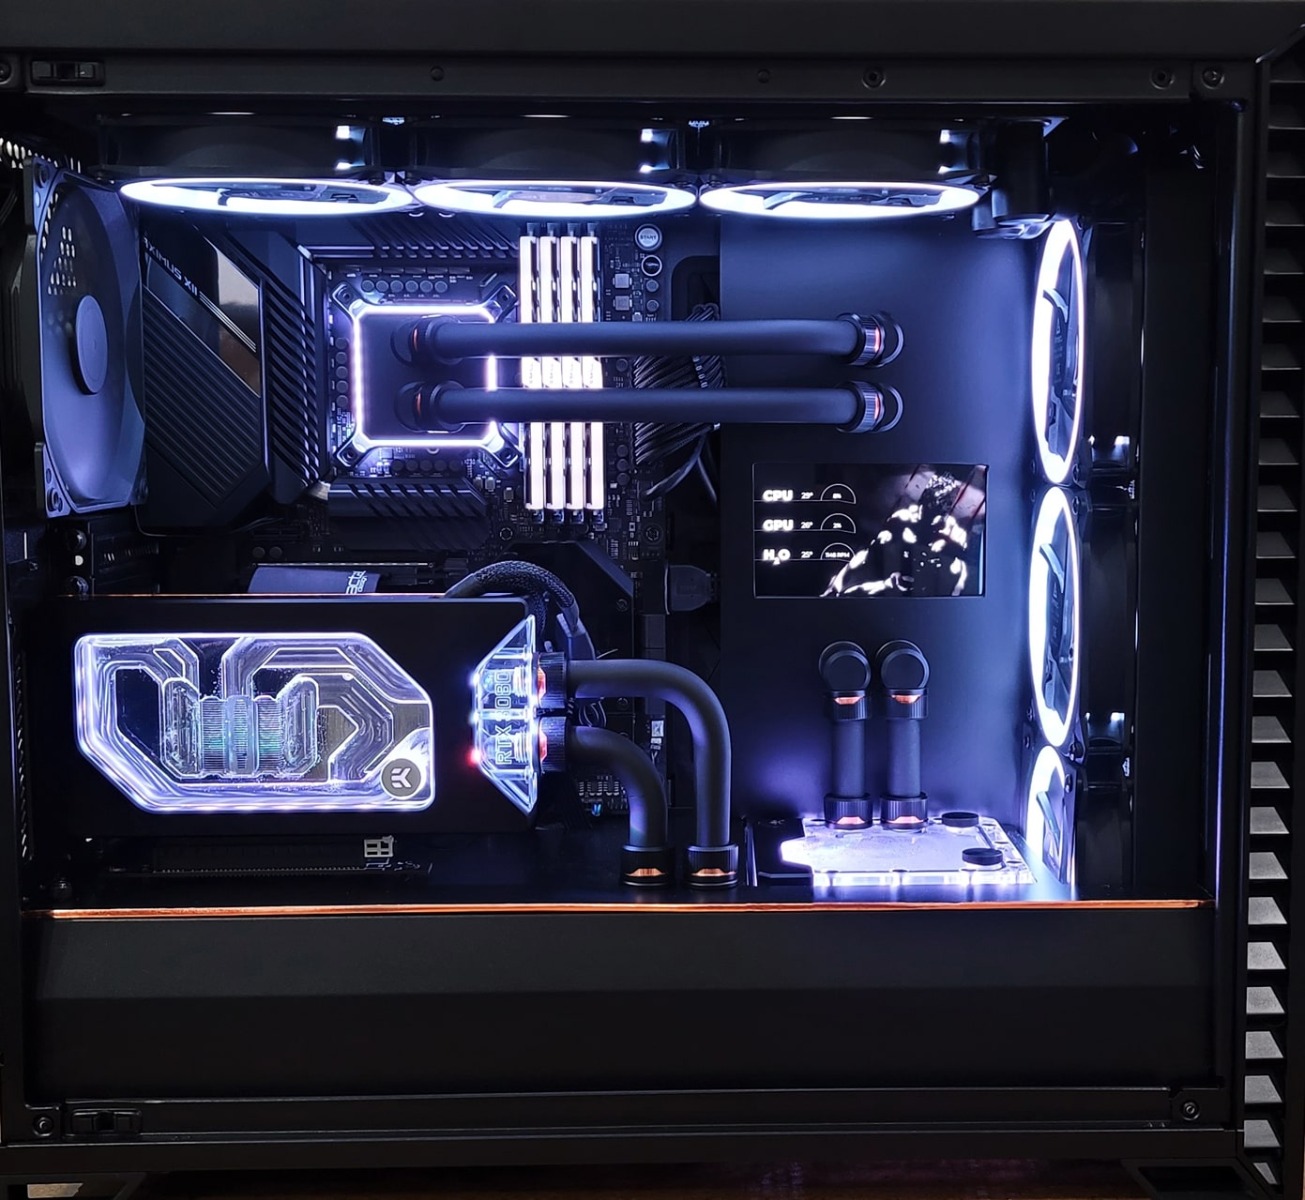 Custom water cooled PC "Luxe" by Mikey Johnstone